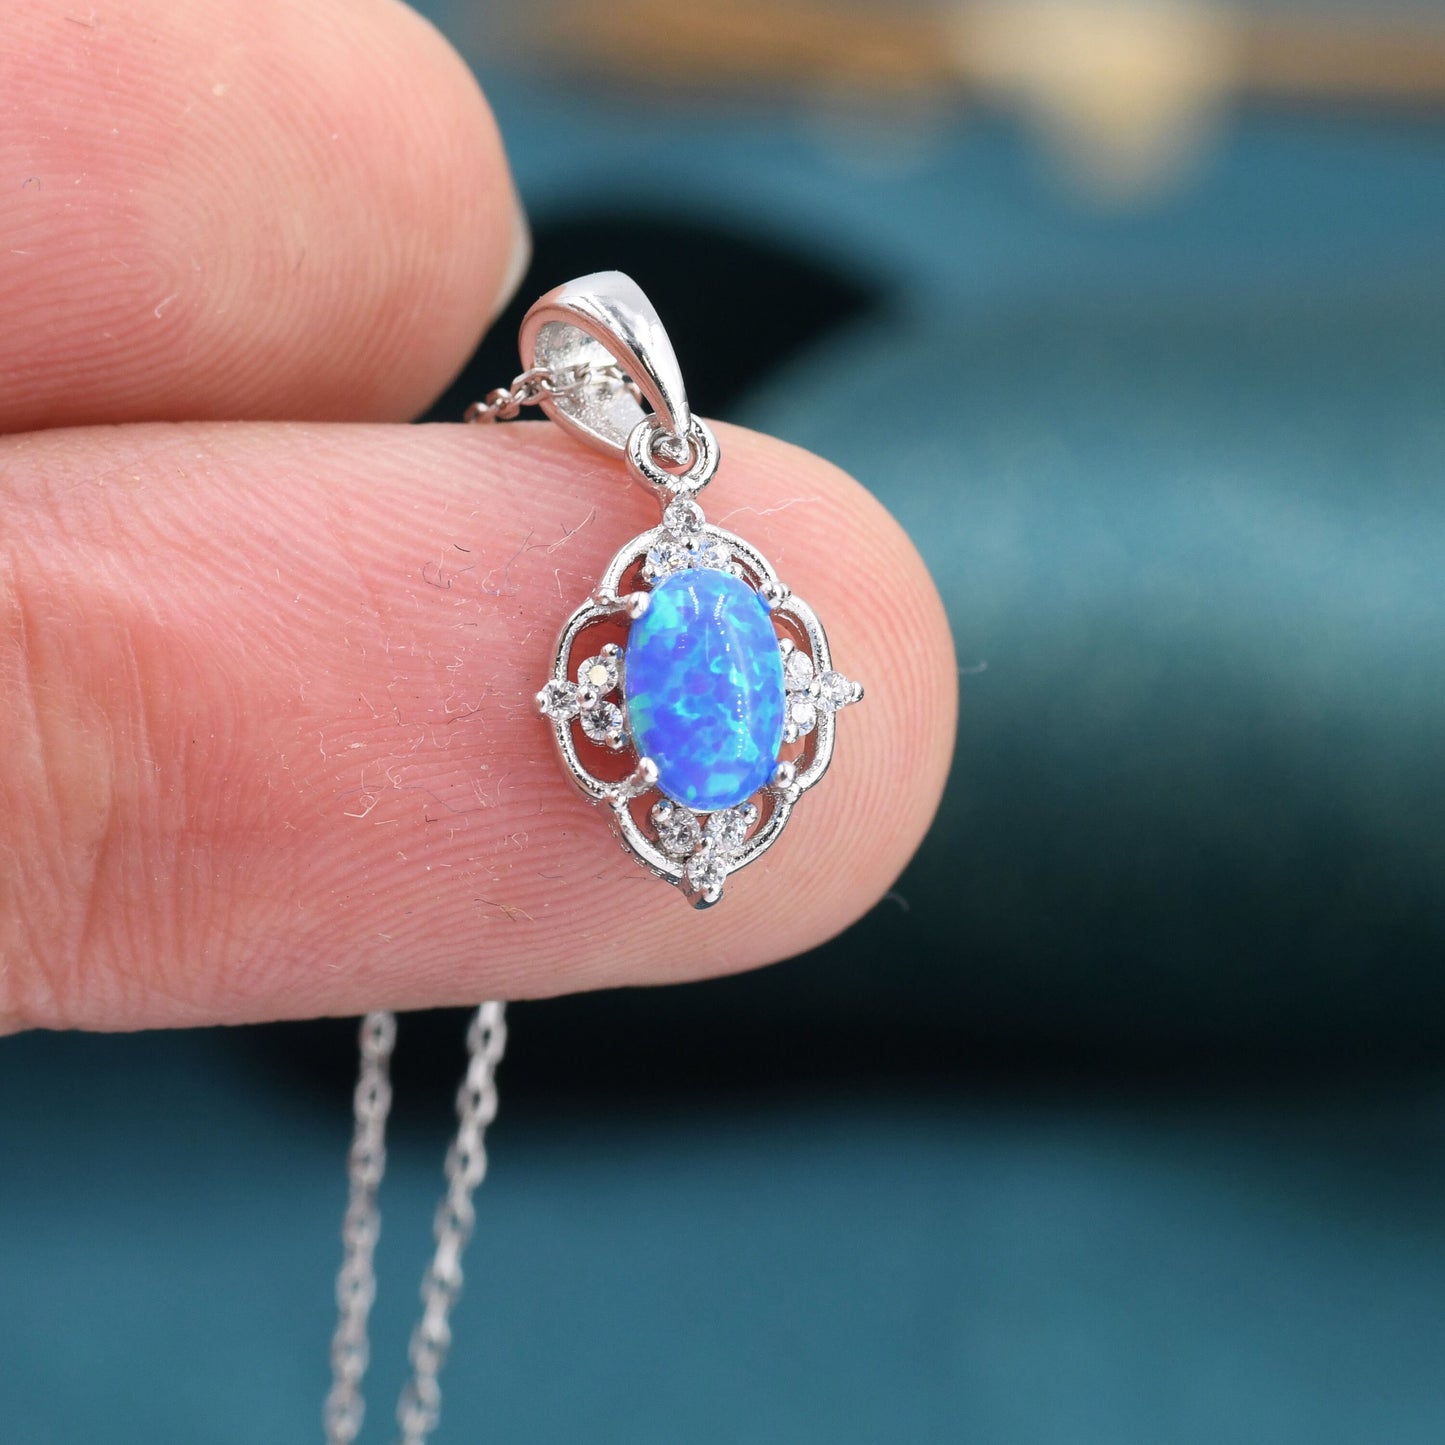 Vintage Style Tiny Blue Opal Pendant Necklace in Sterling Silver, Lace Opal Necklace